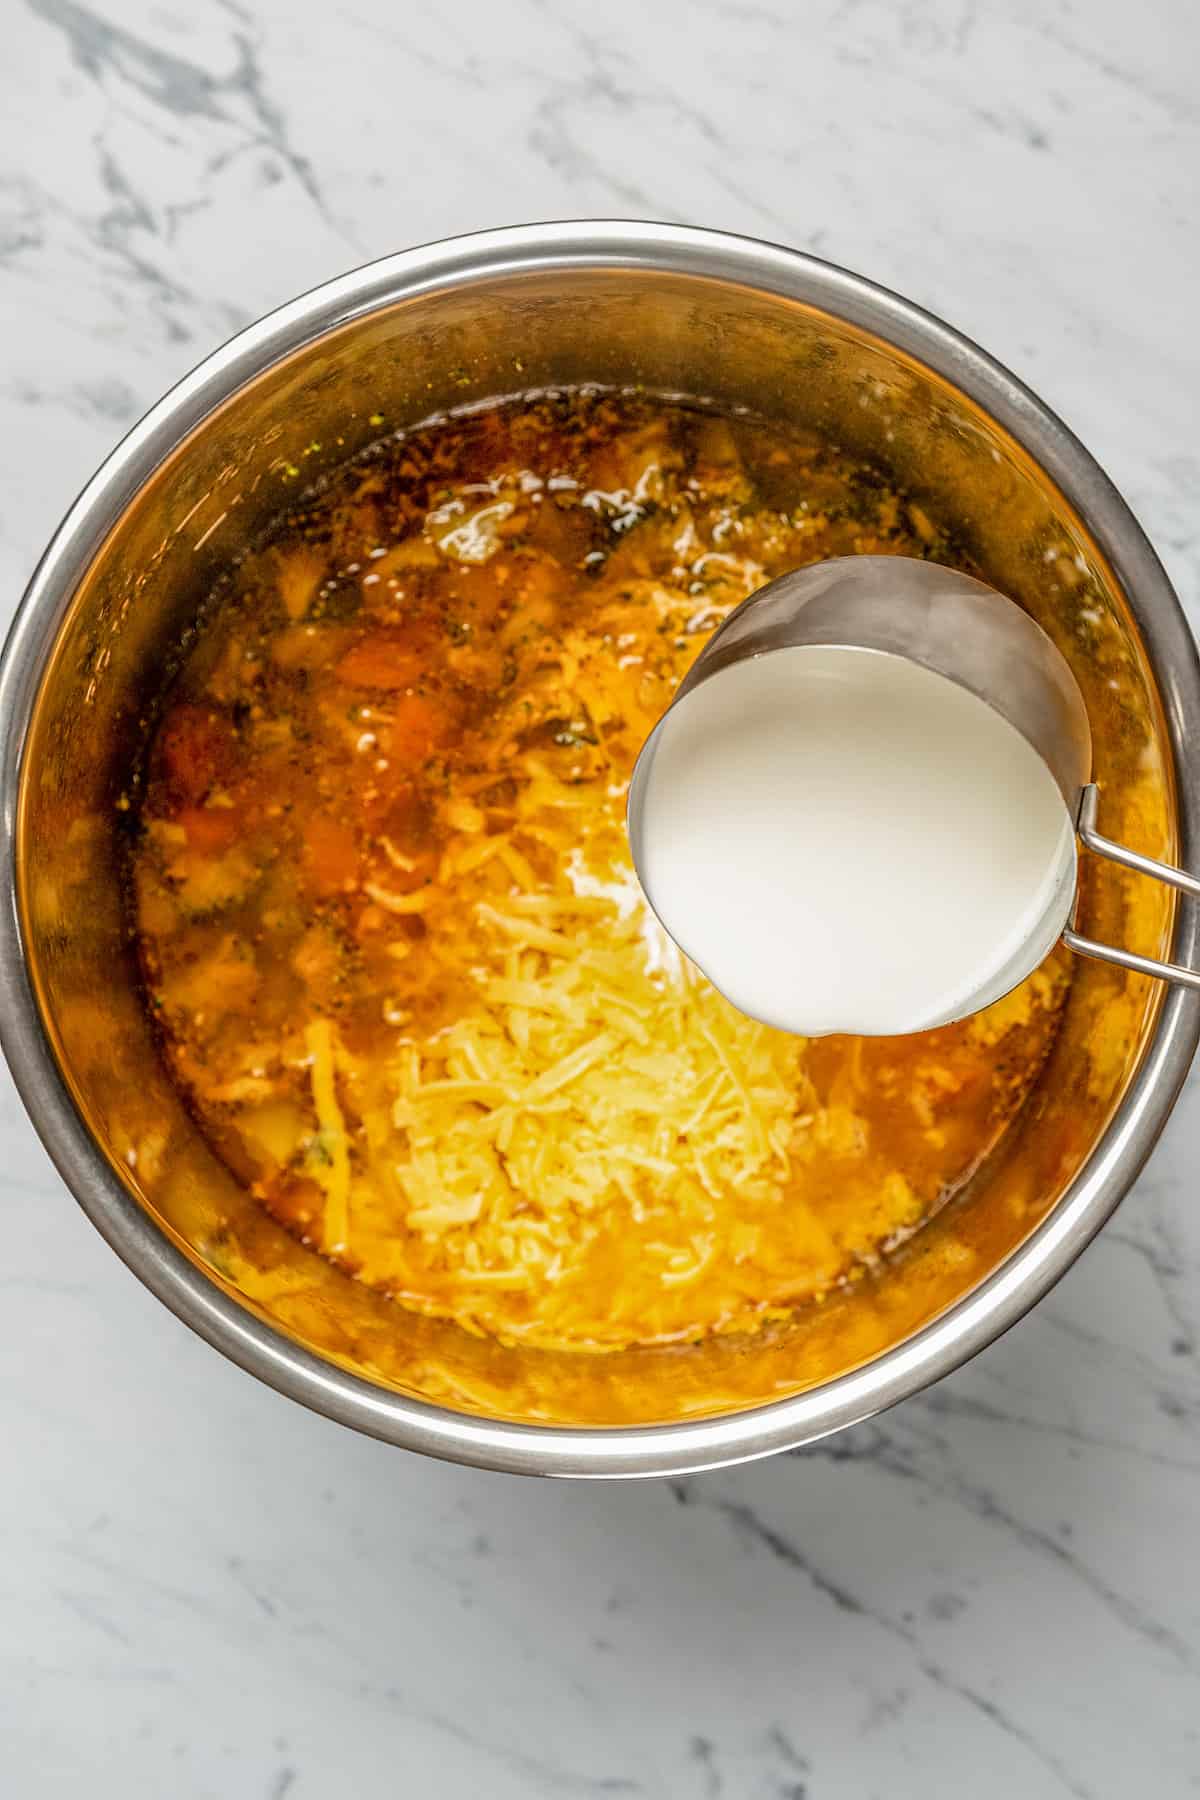 Half-and-half and shredded cheese is added into soup ingredients inside an Instant Pot.